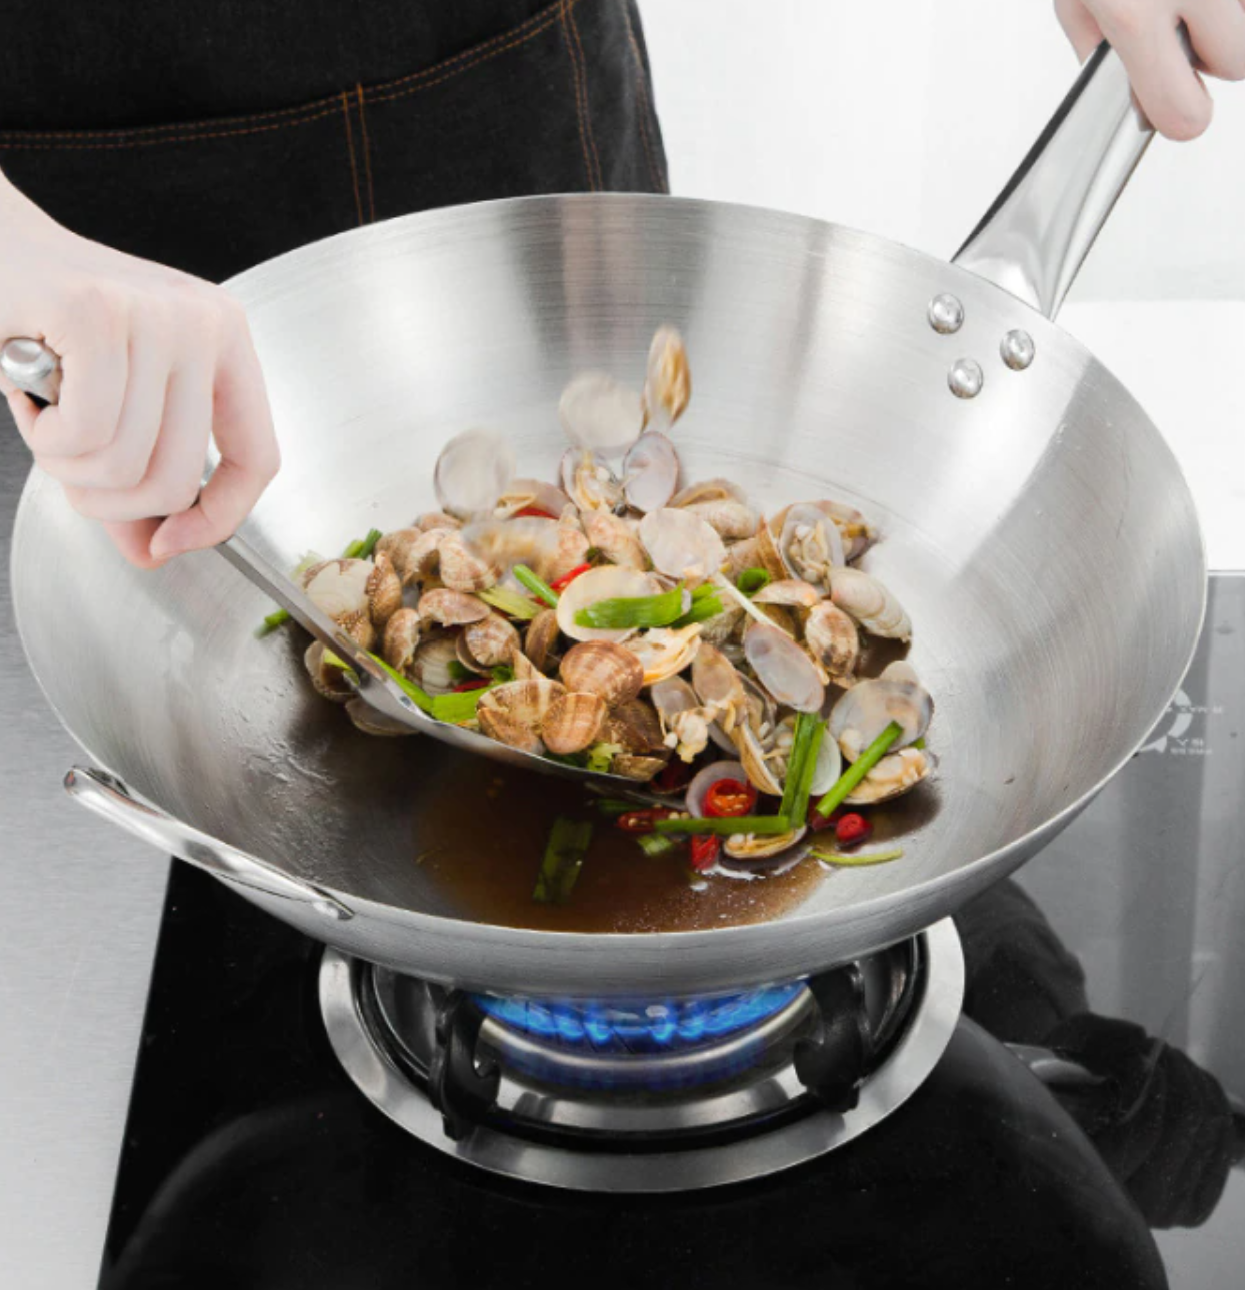 26cm Stainless Steel Wok Pan With Long & Short Handles